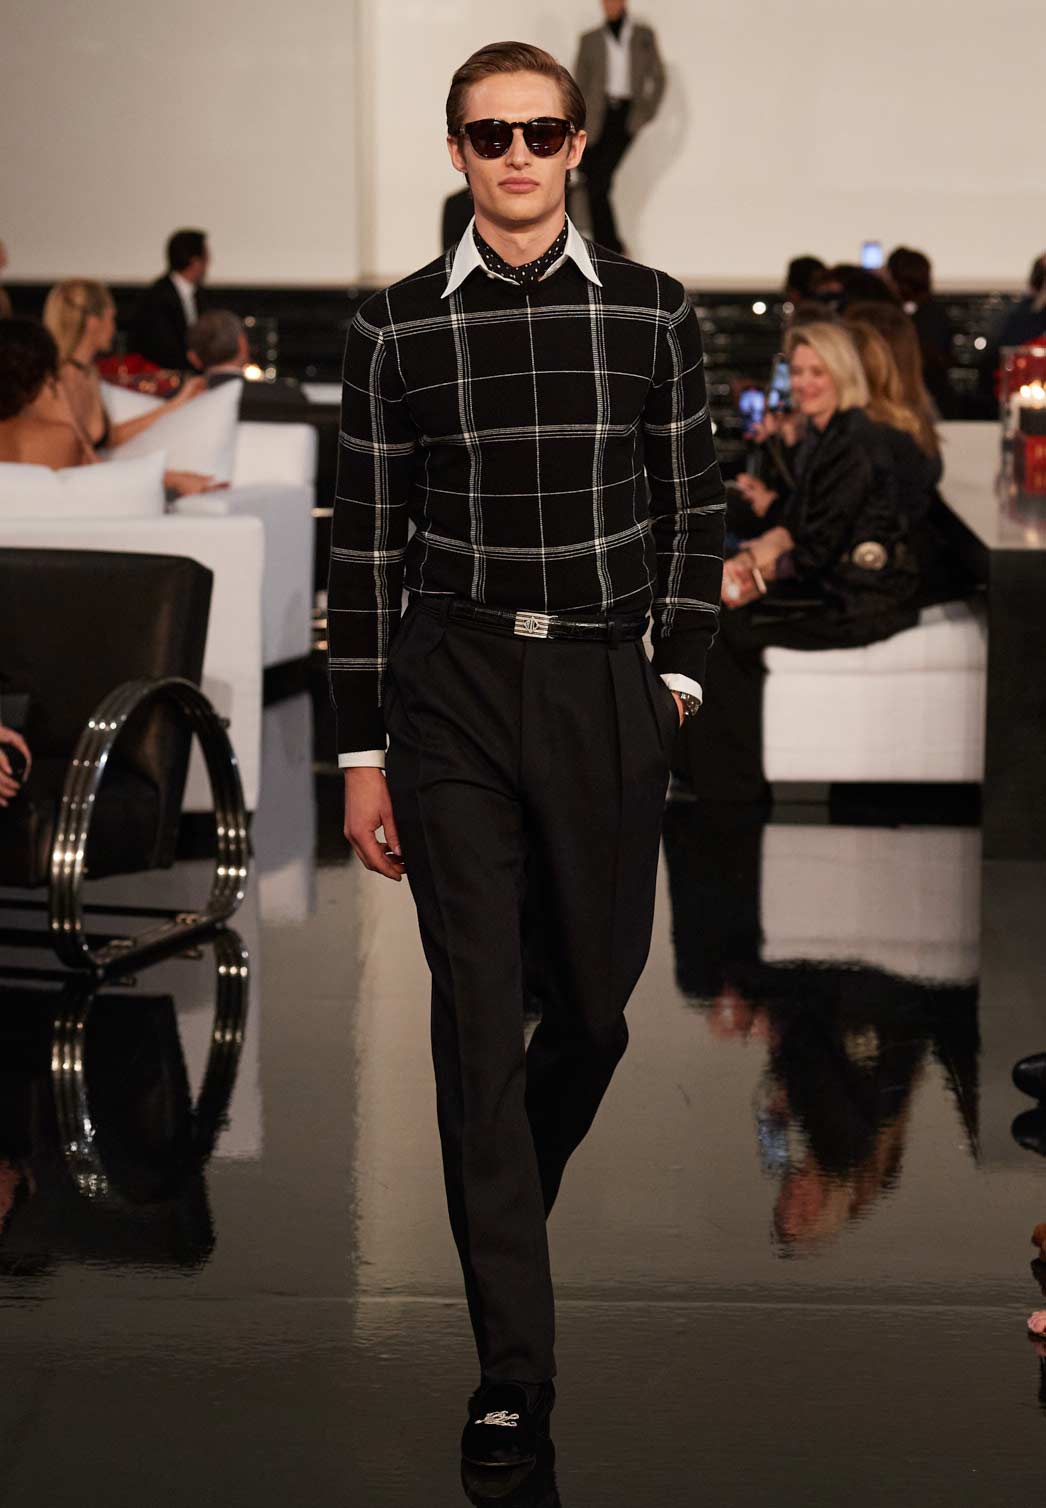 Model wearing look from the Fall/Winter Ralph Lauren Collection show.